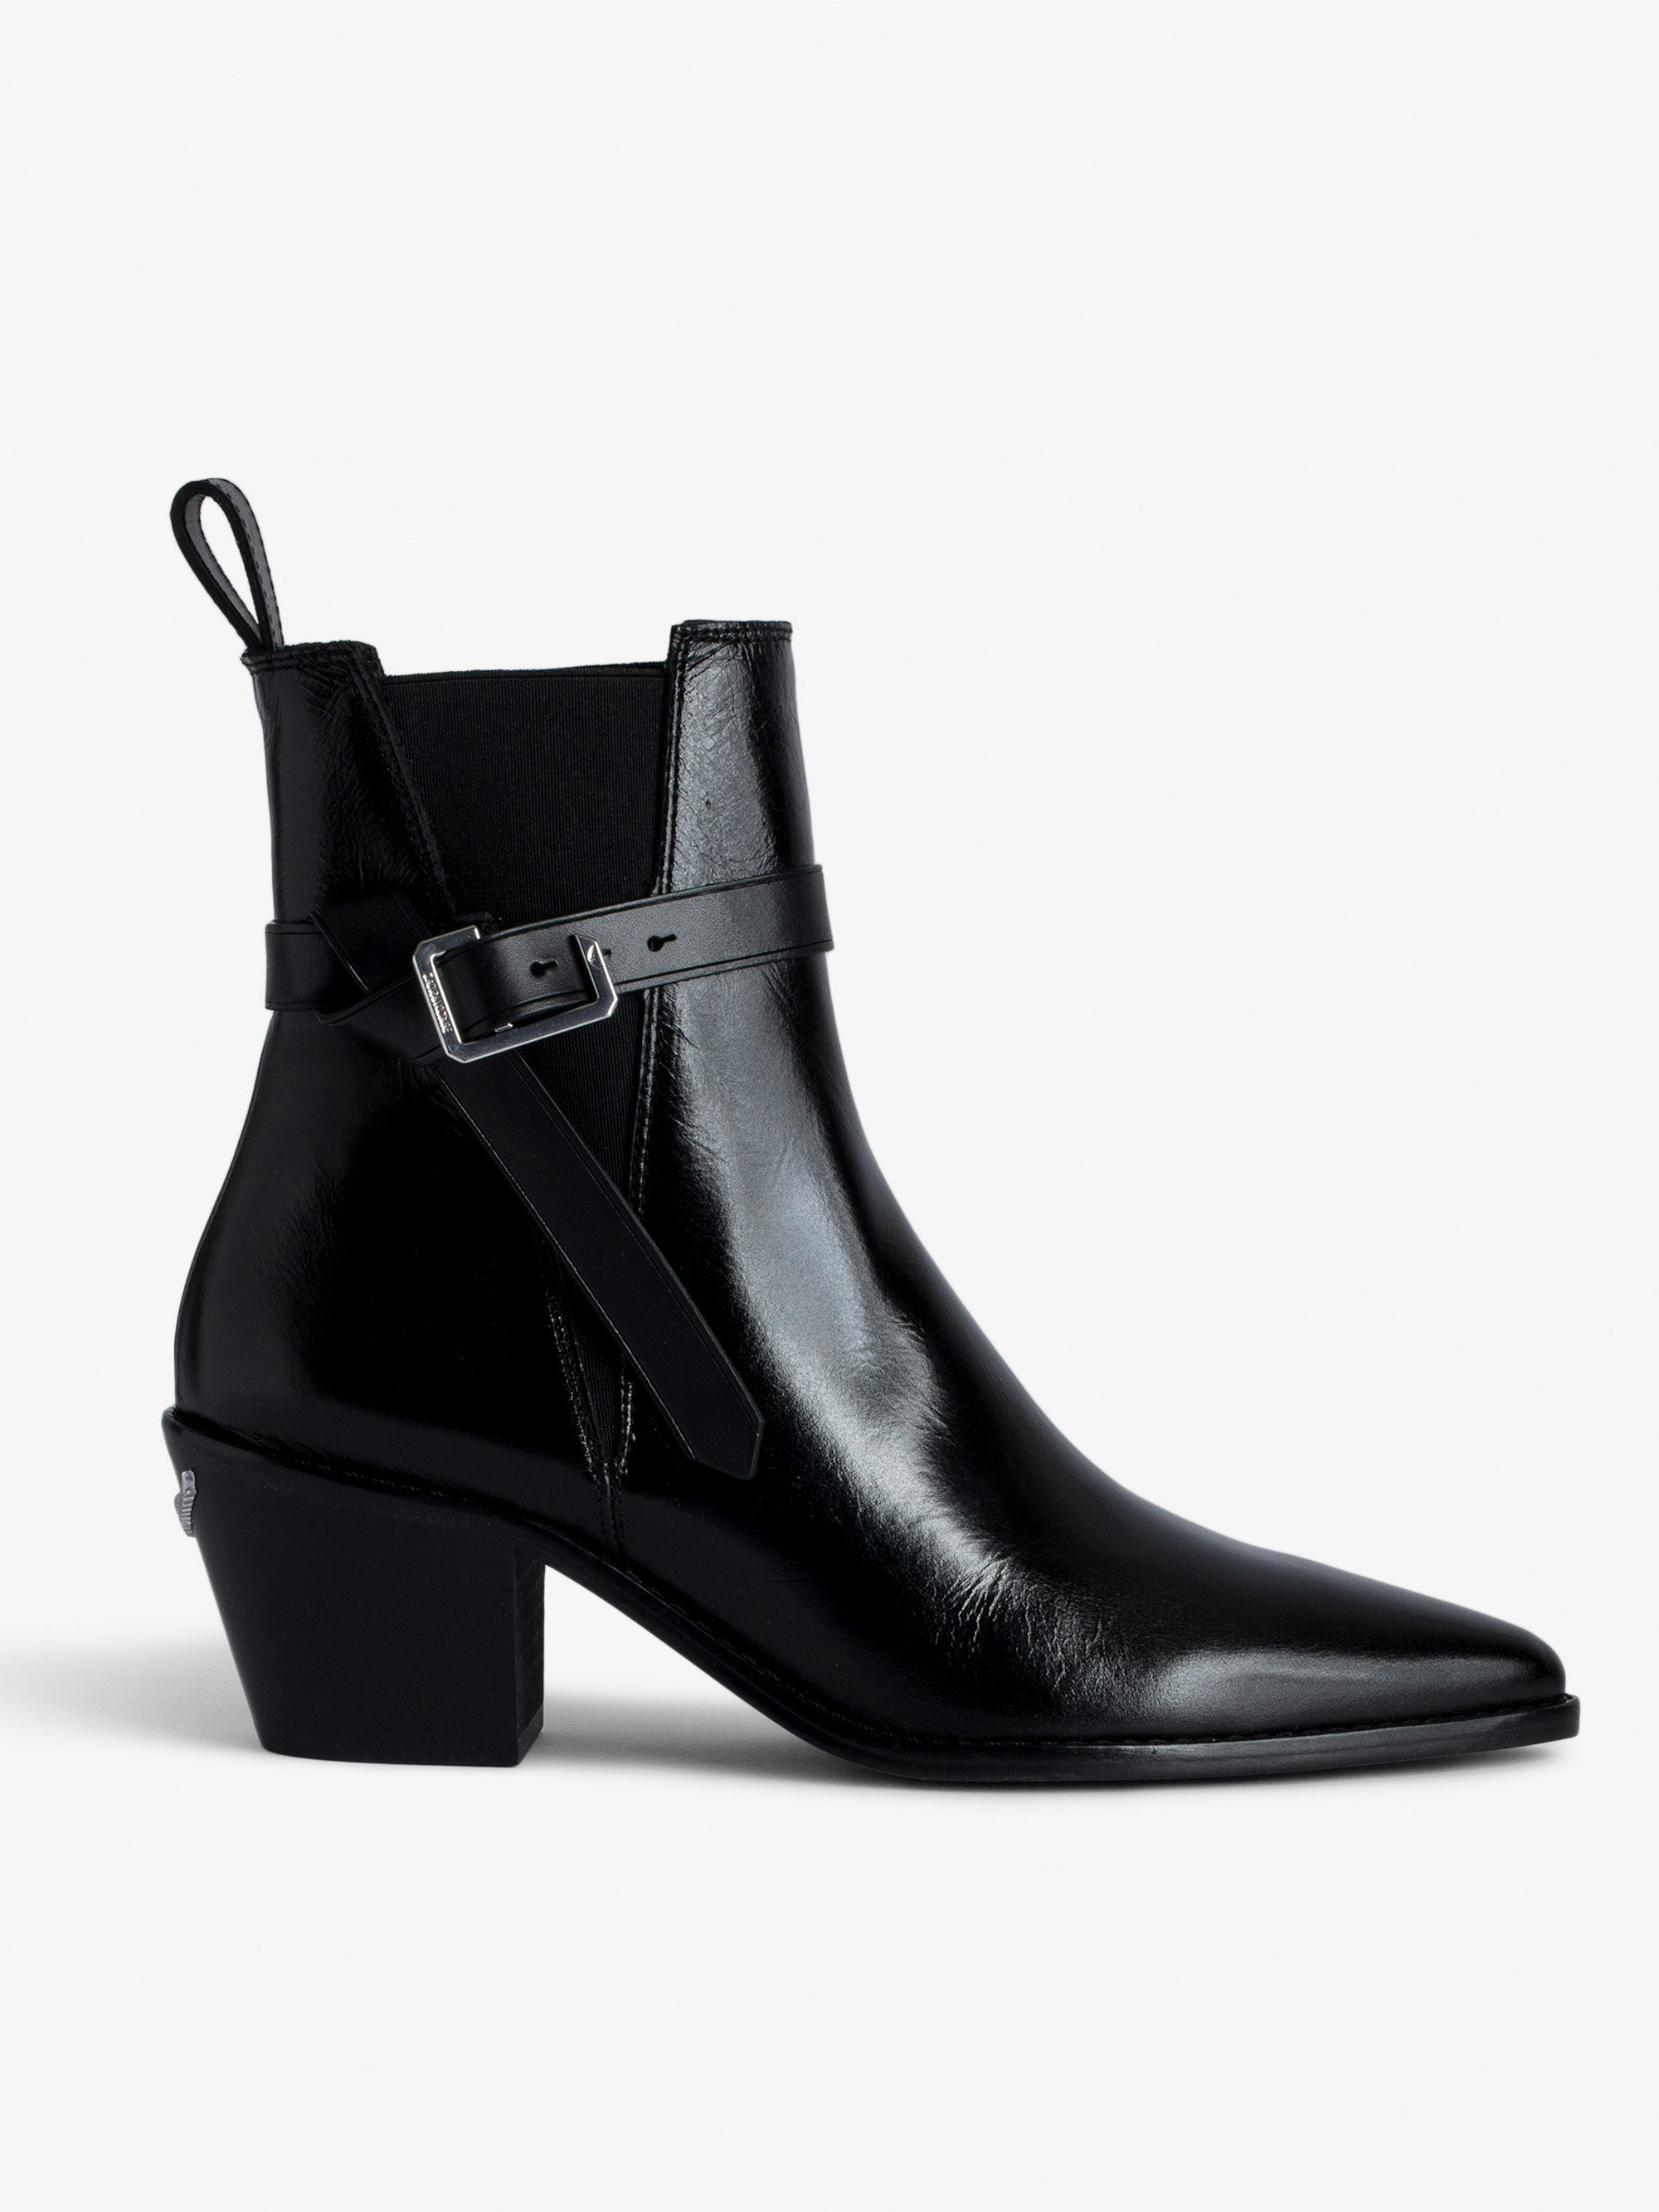 Tyler Ankle Boots - Women’s black vintage-style leather ankle boots with C buckle.